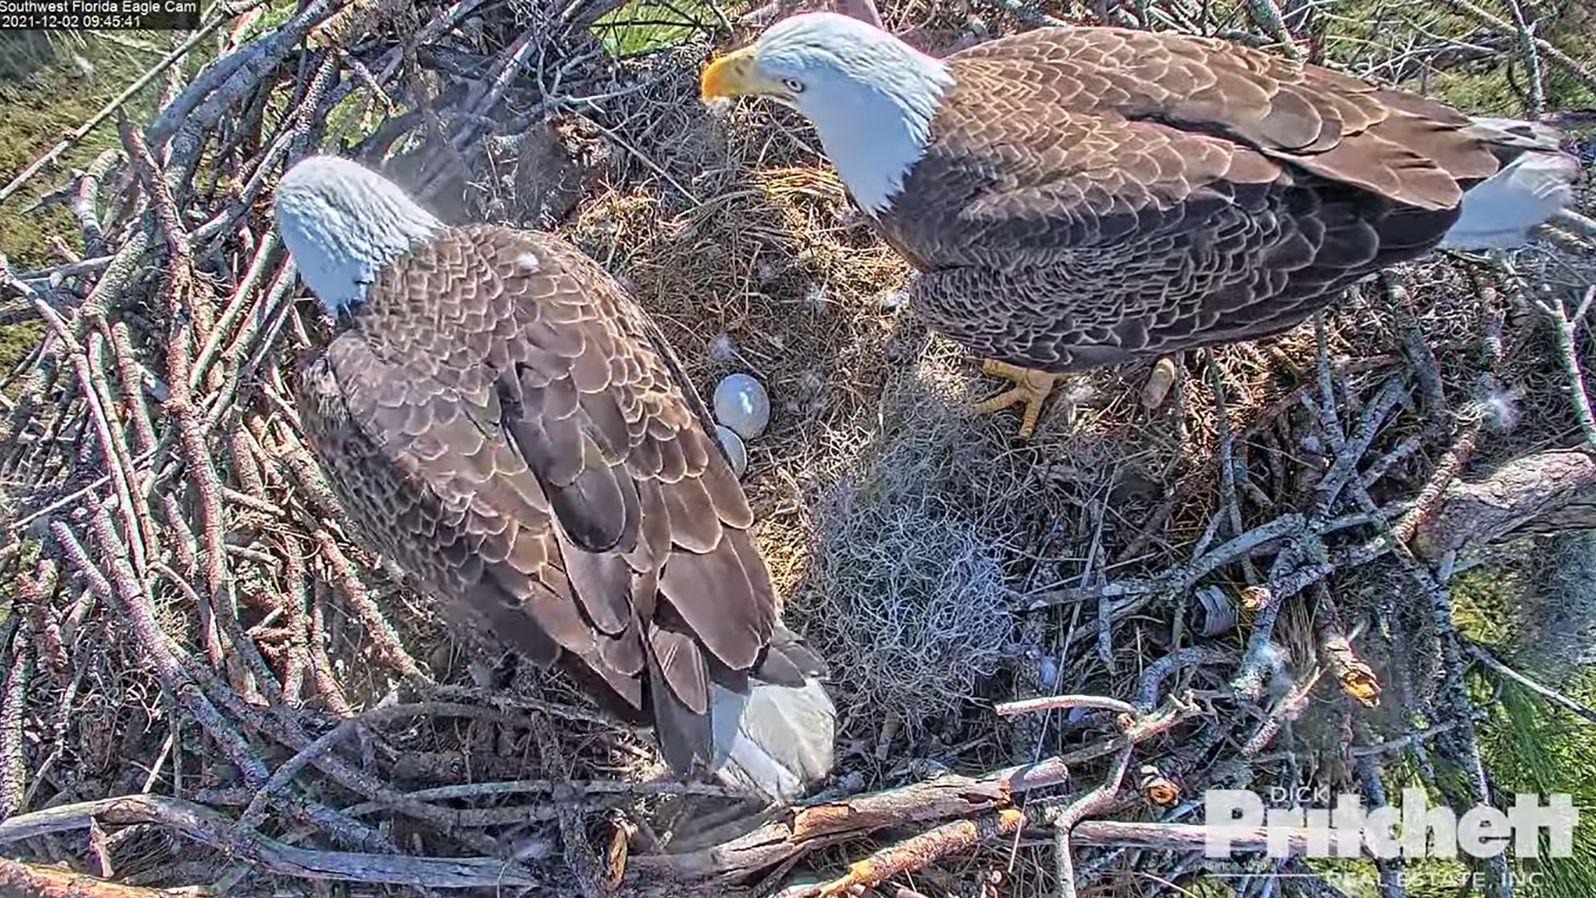 Harriet and her mate M15 guarding their eggs.